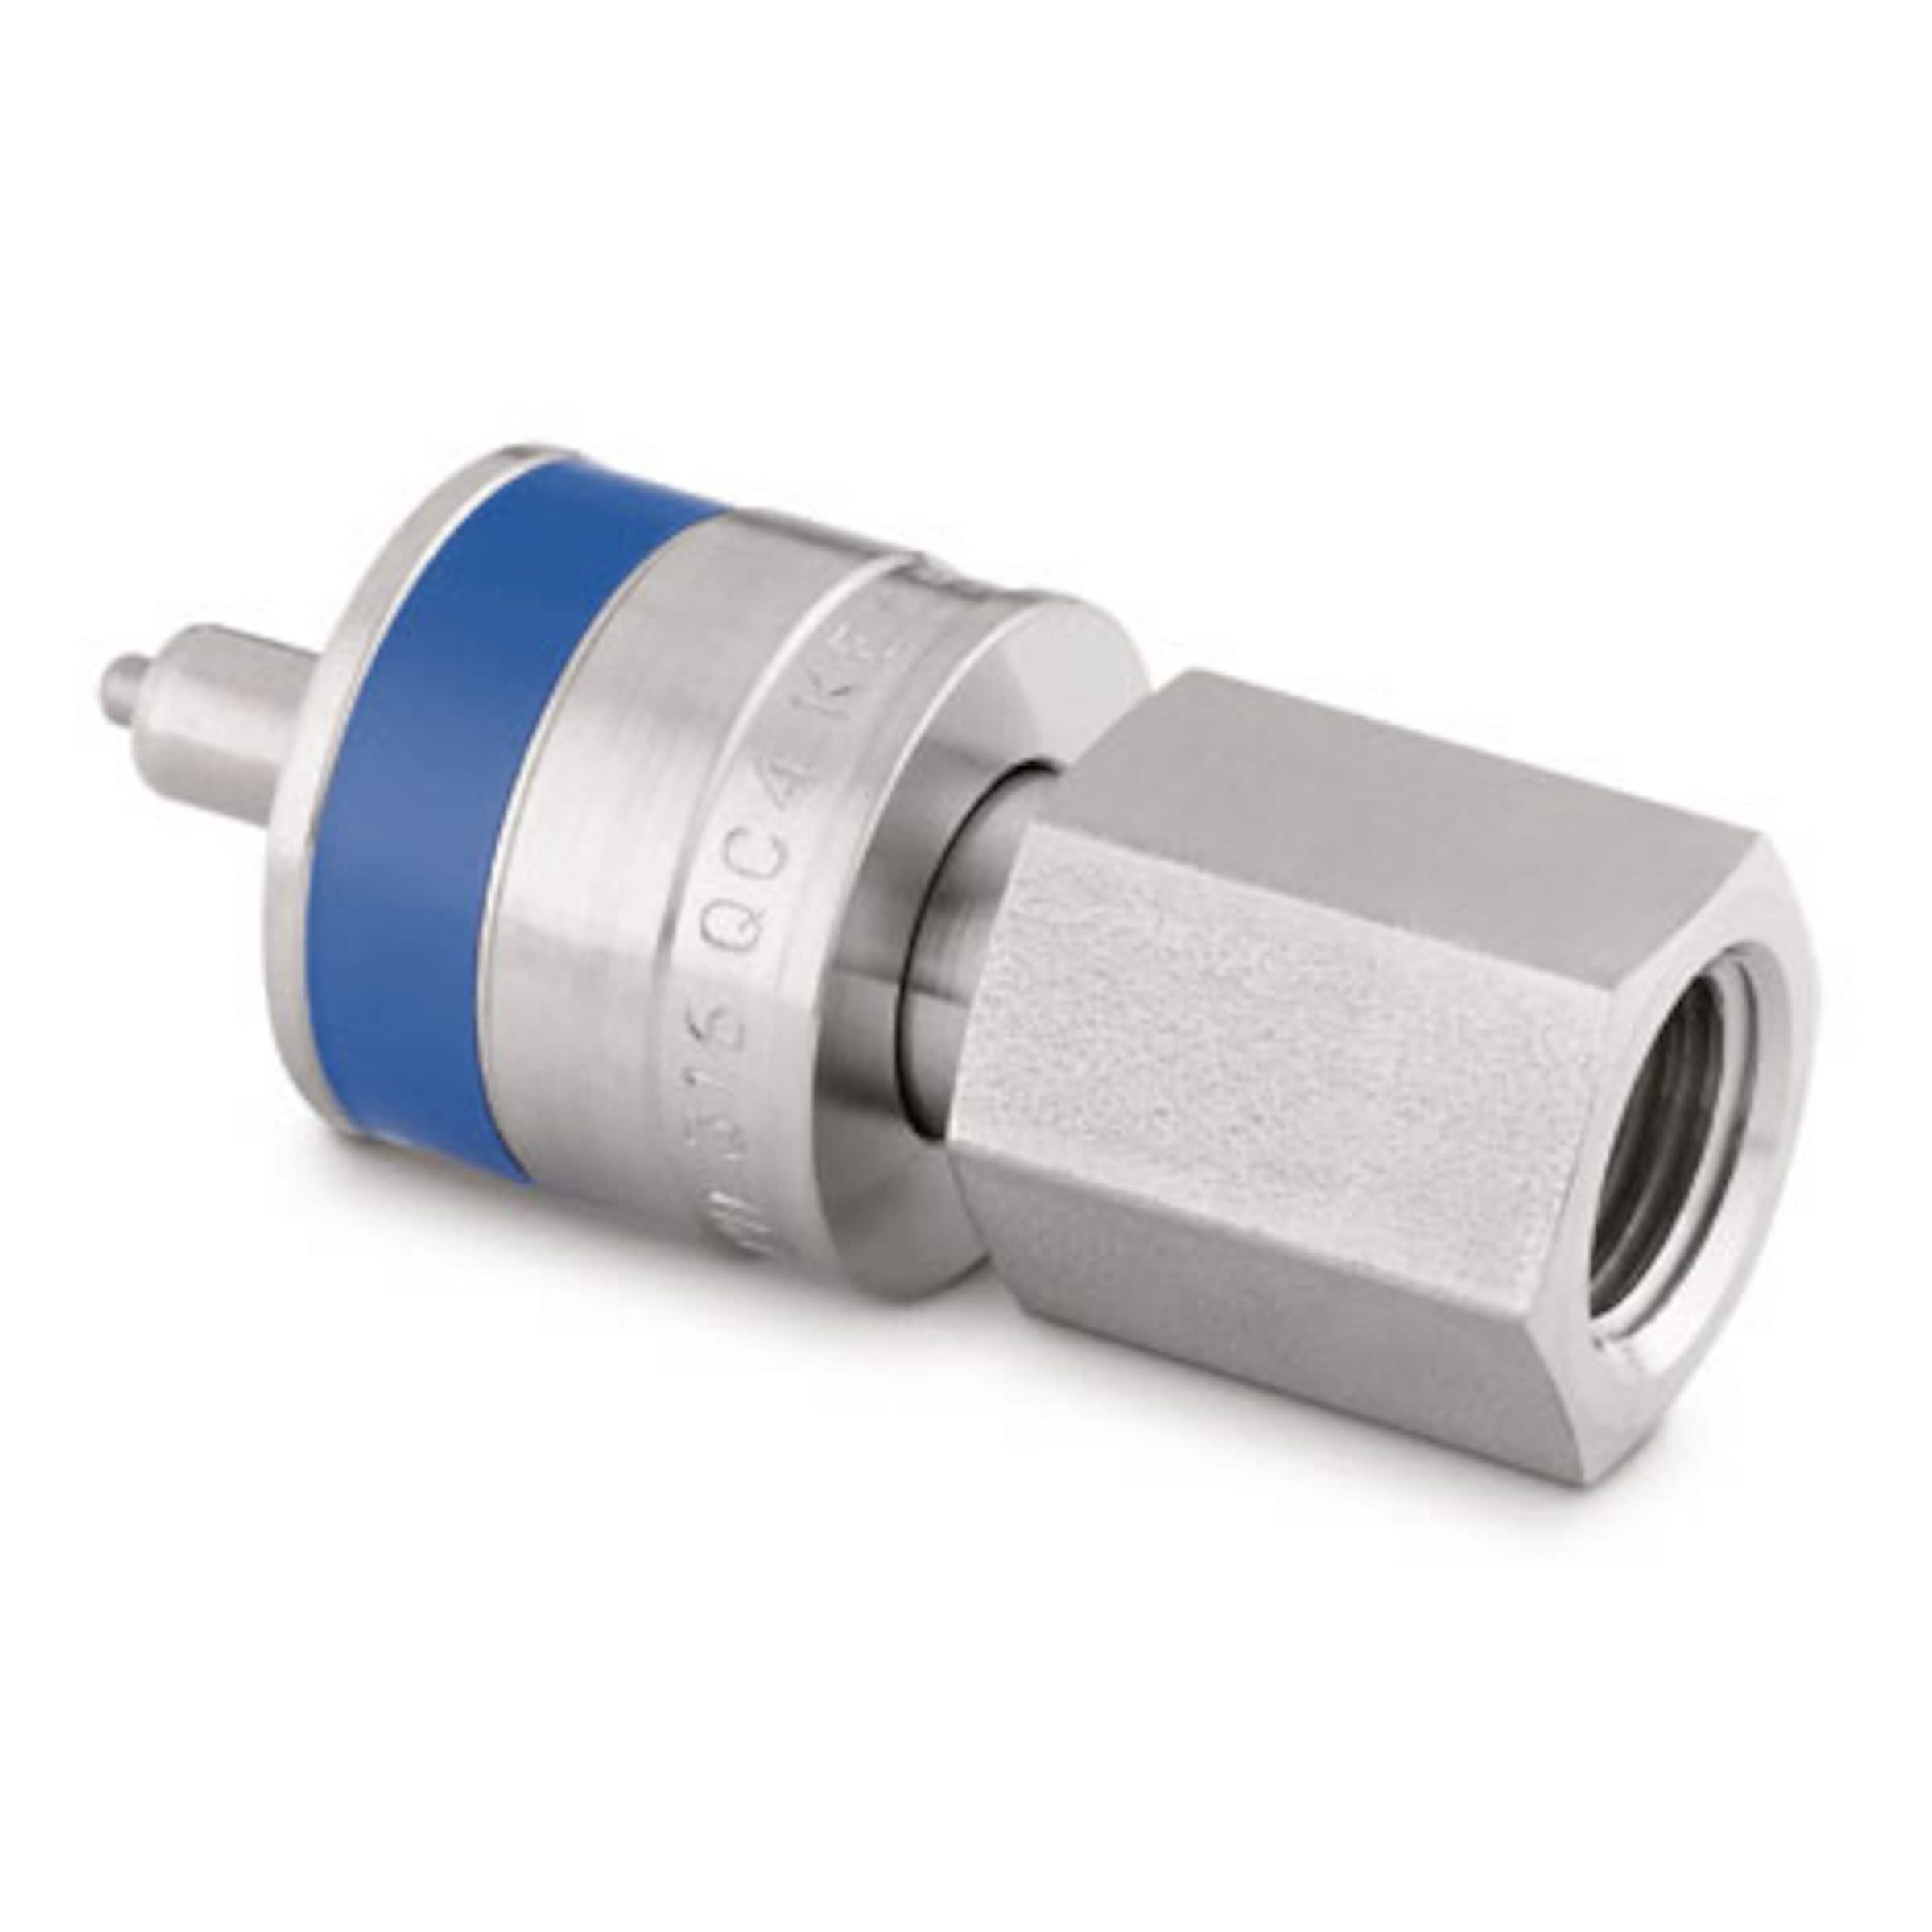 Stainless Steel Instrumentation Quick Connect Stem with Valve, 0.2 Cv, 1/4  in. Female NPT, Blue Key, Instrumentation Quick Connects, Quick Connects, Valves, All Products